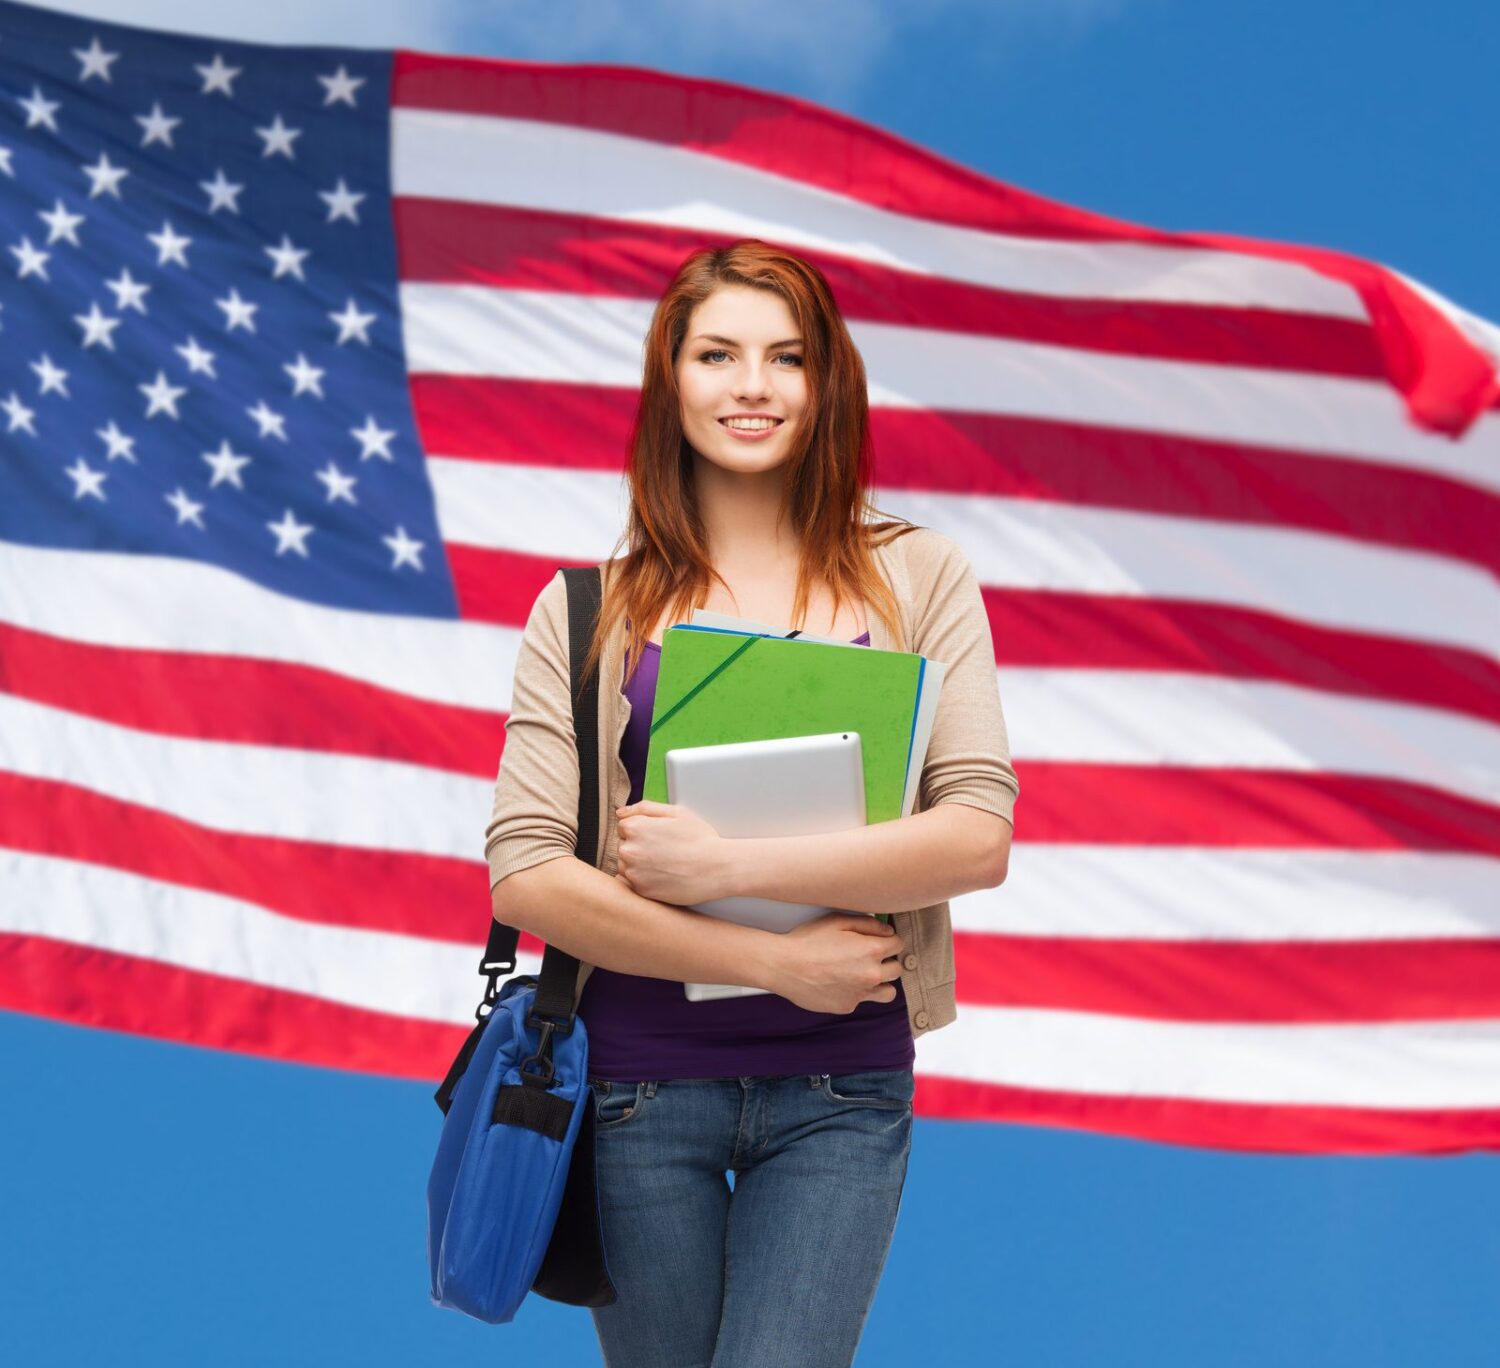 When Can You Apply for a Green Card after H1B?